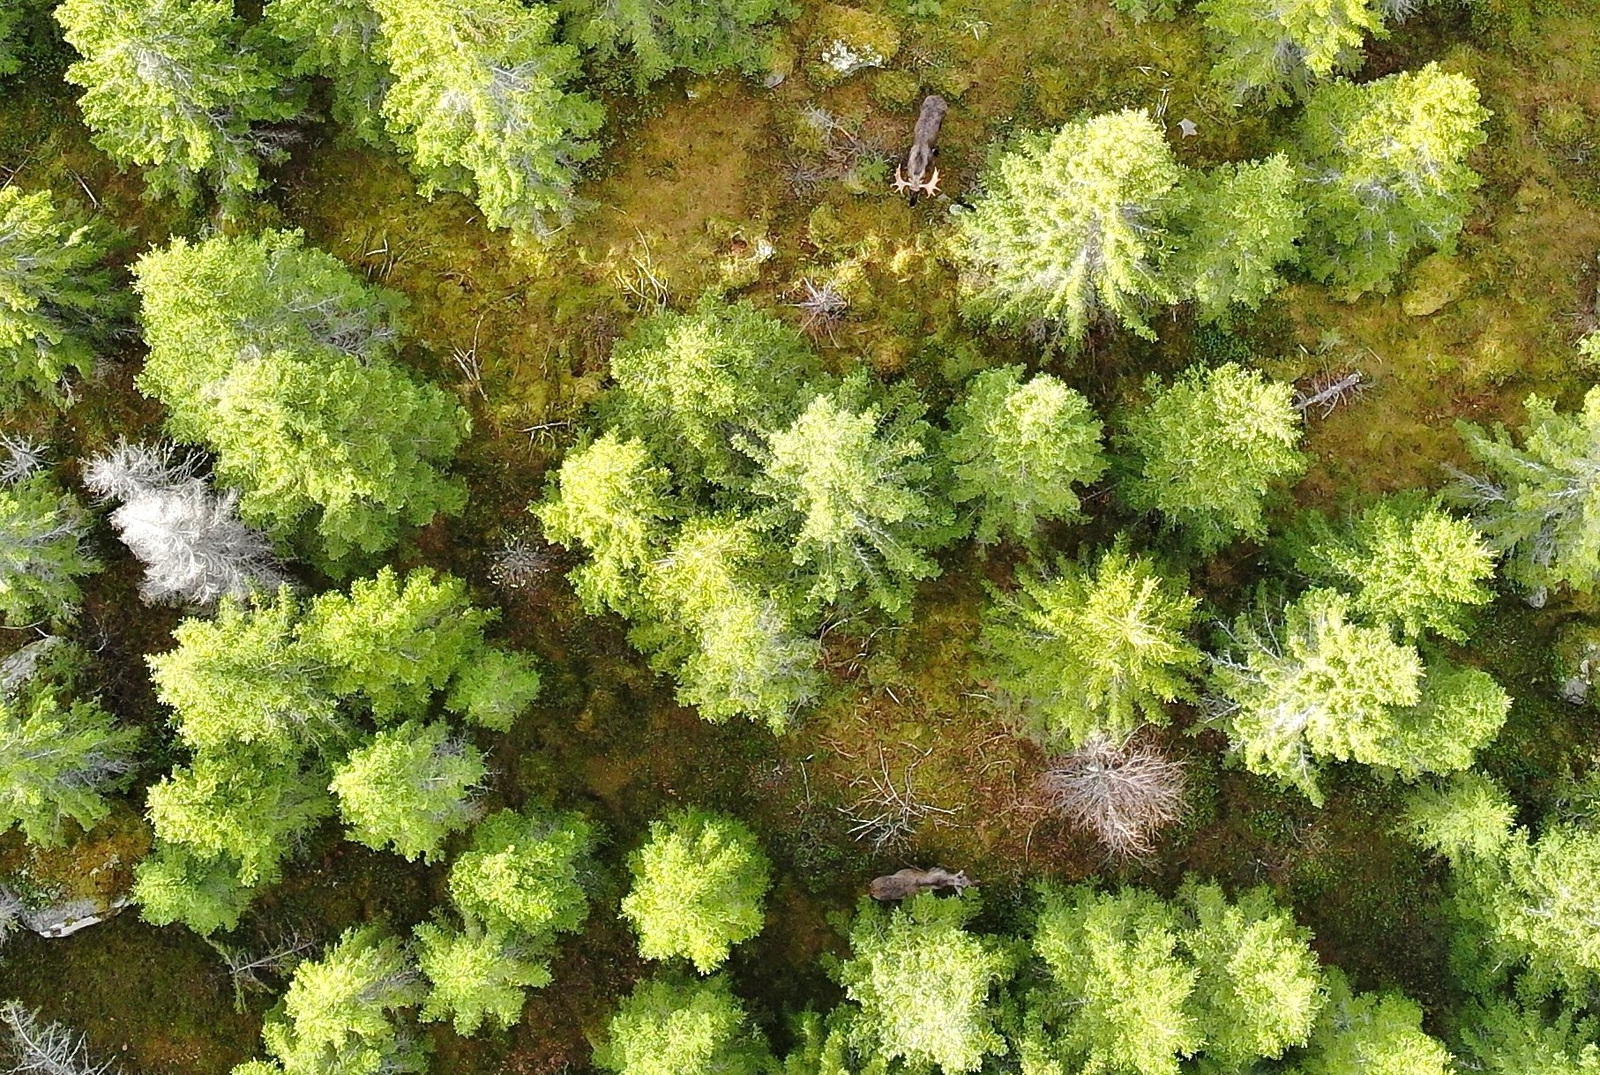 Moose observed from a drone